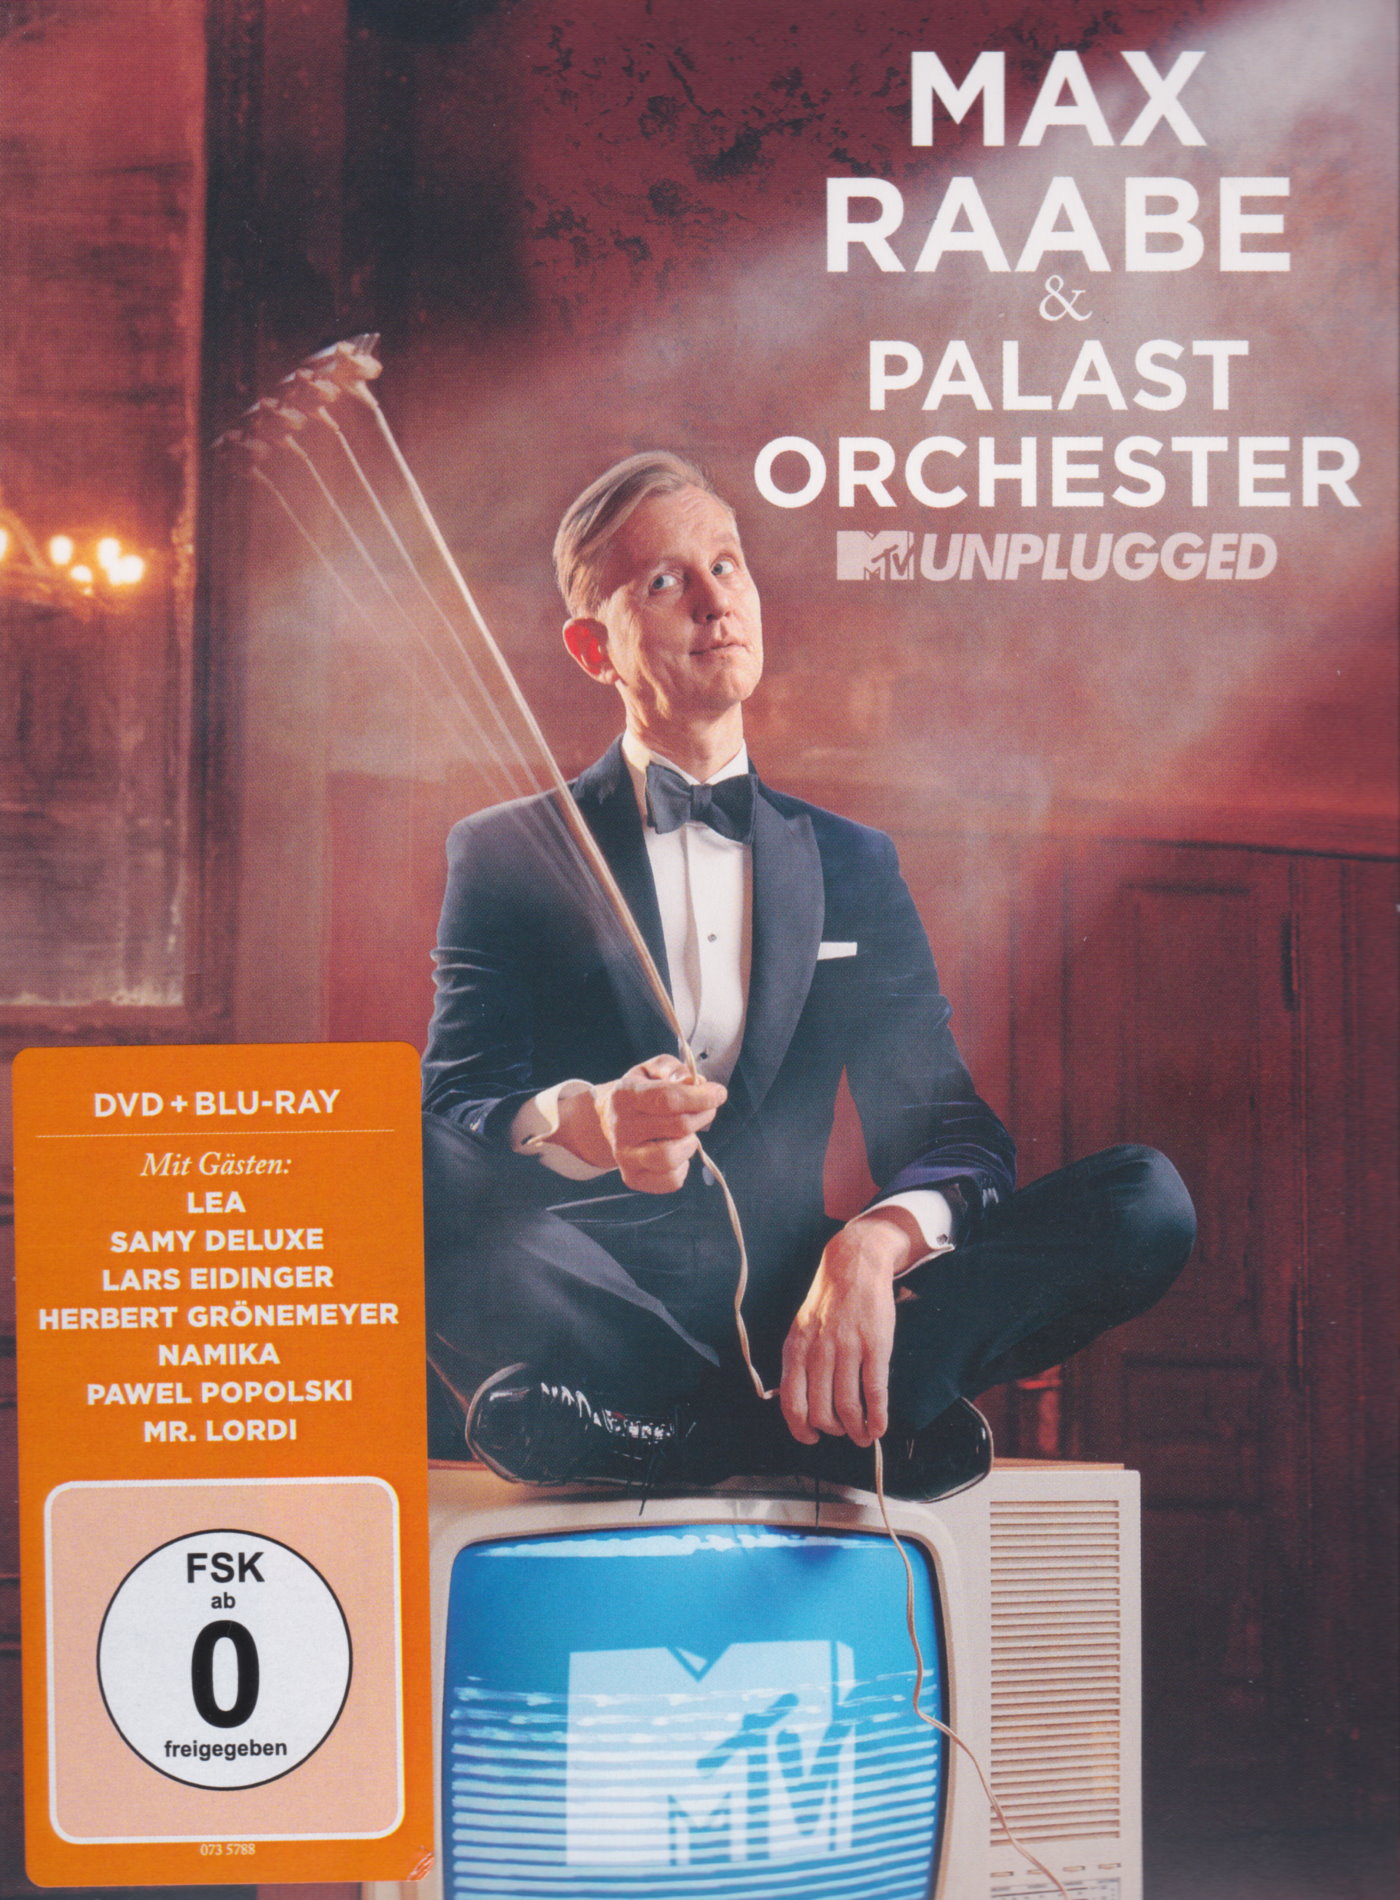 Cover - Max Raabe & Palast Orchester - MTV Unplugged.jpg